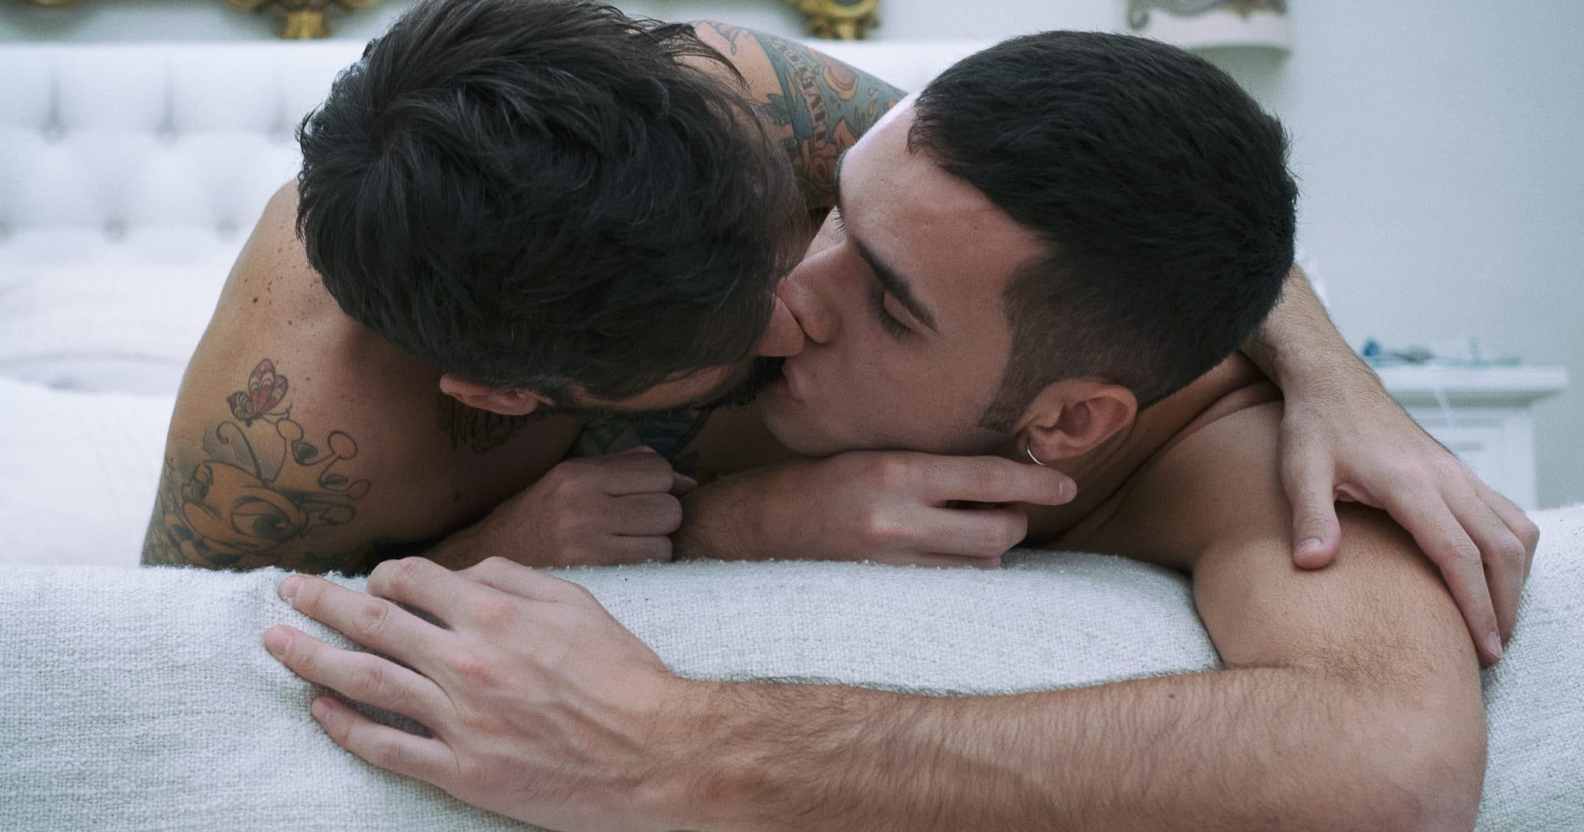 Lesbian - Gay porn: I'm a lesbian who loves gay male porn. Here's why